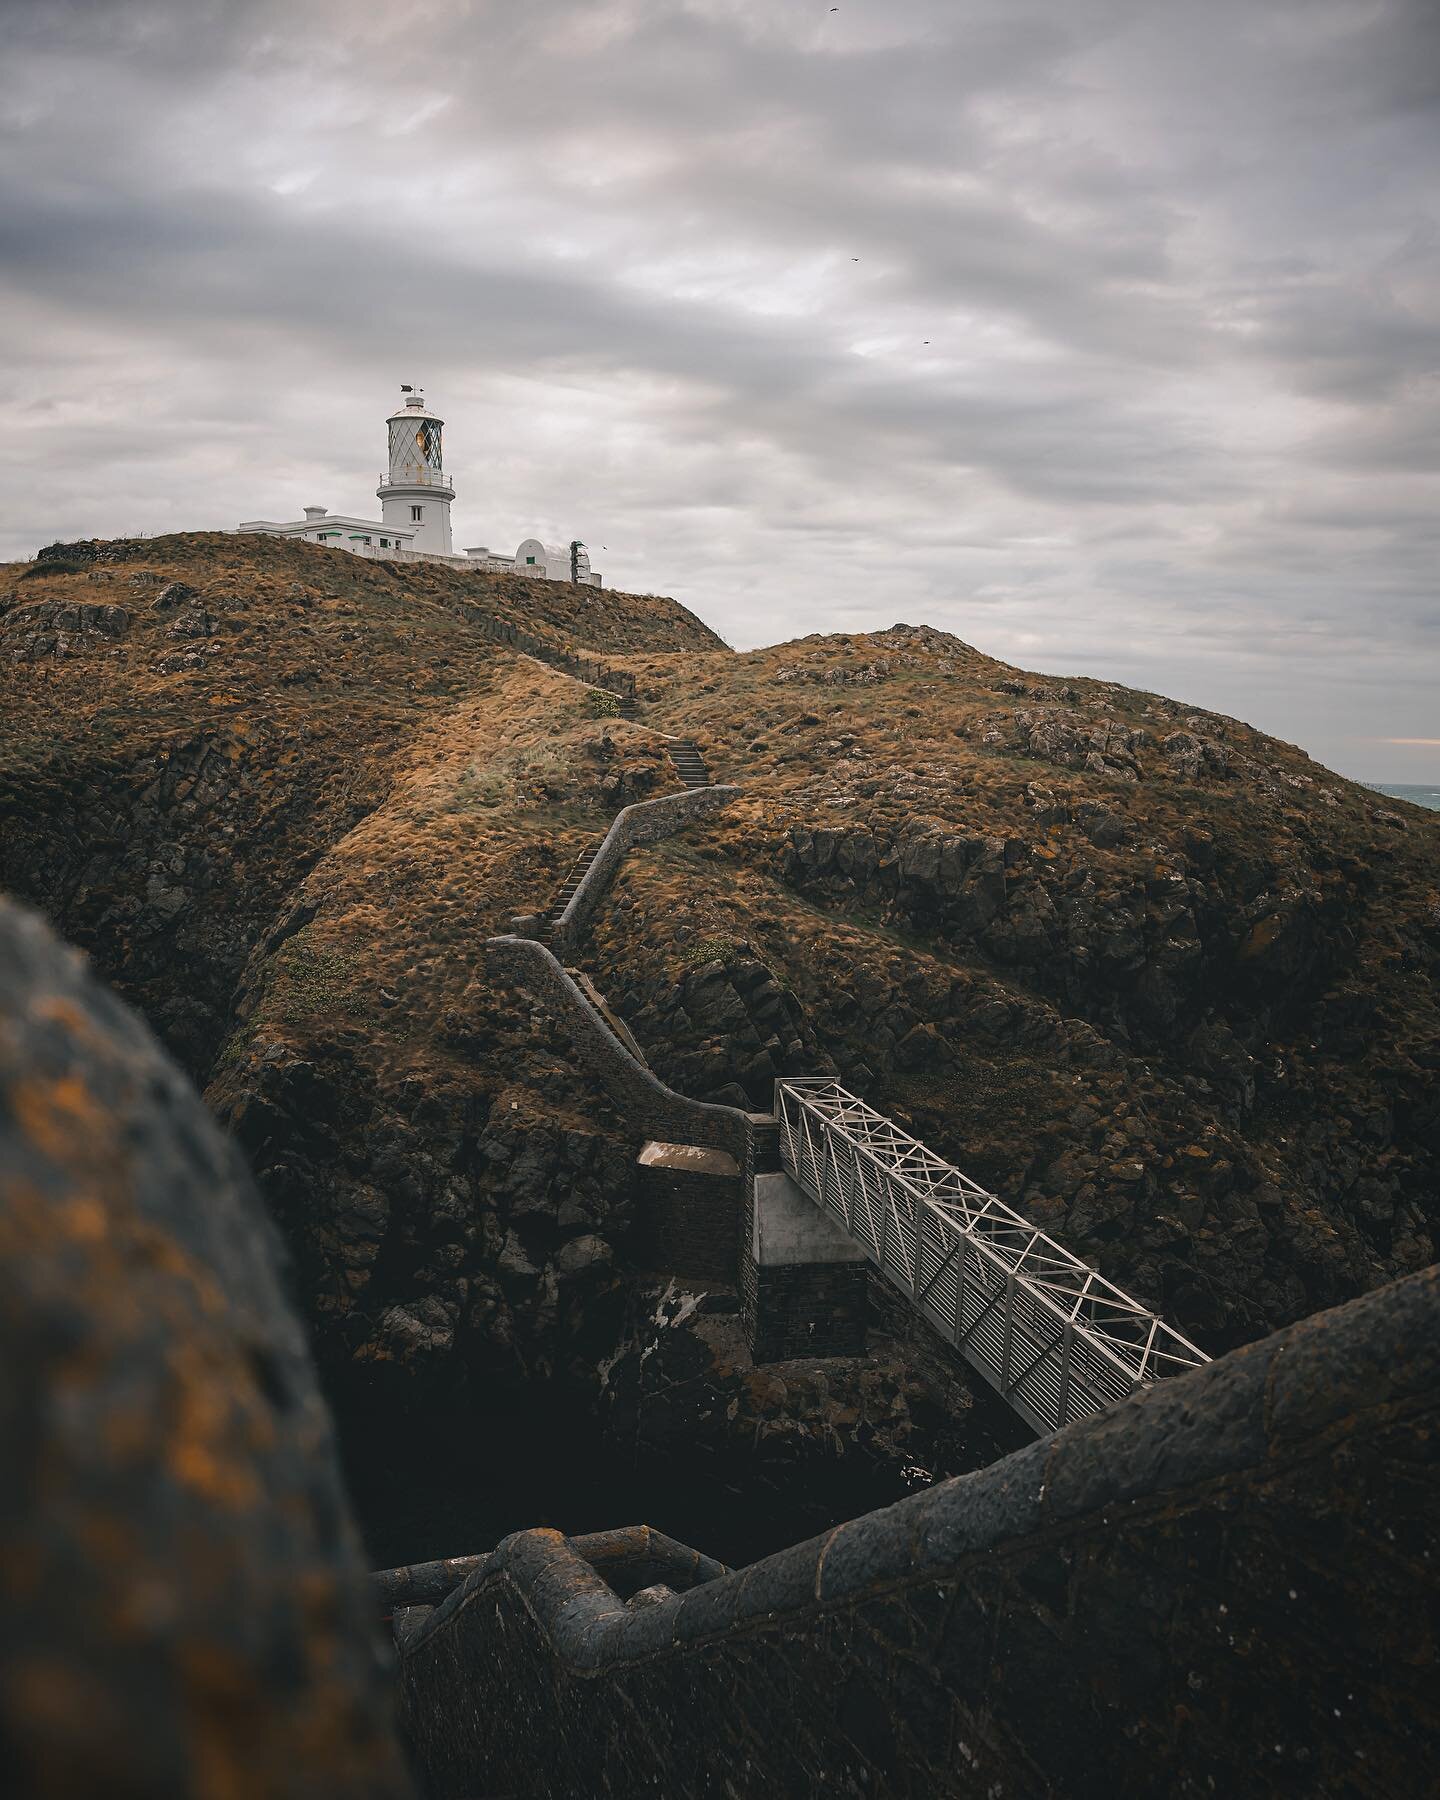 The stairs to Strumble Head Ligthouse. I wonder what it is about lighthouses that&rsquo;s so intriguing? 

@nikoneurope Z9 &amp; 24-70 2.8 S
1/100 &bull; f5.6 &bull; iso400

#visitwales #visitpembrokeshire #lighthouse #thewalescollective #walescoast 